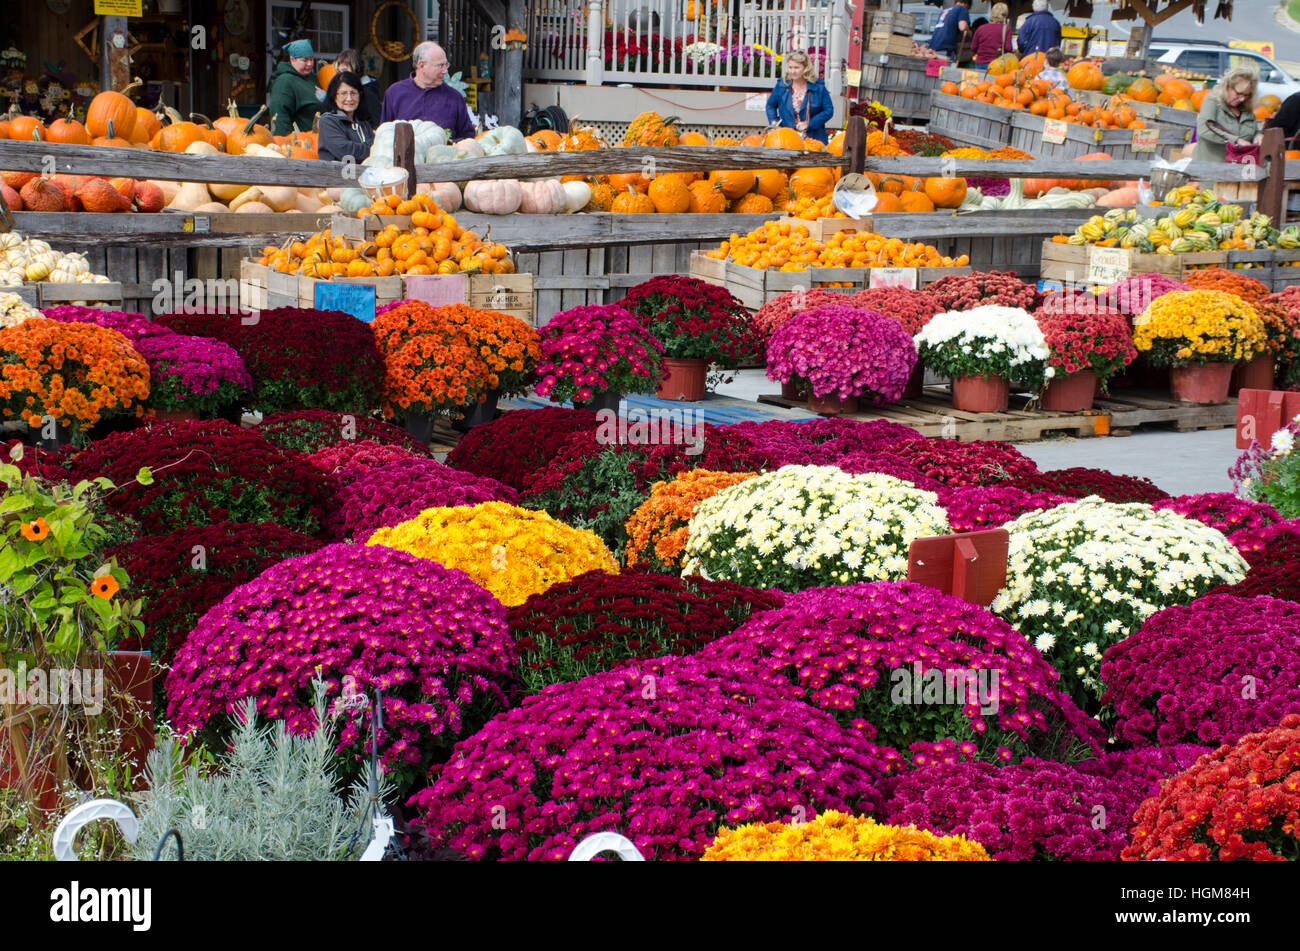 Brightly colored mums flowers, pumpkins, and other autumn produce at Baugher's Orchards and Farms in Westminster, Maryland. Stock Photo